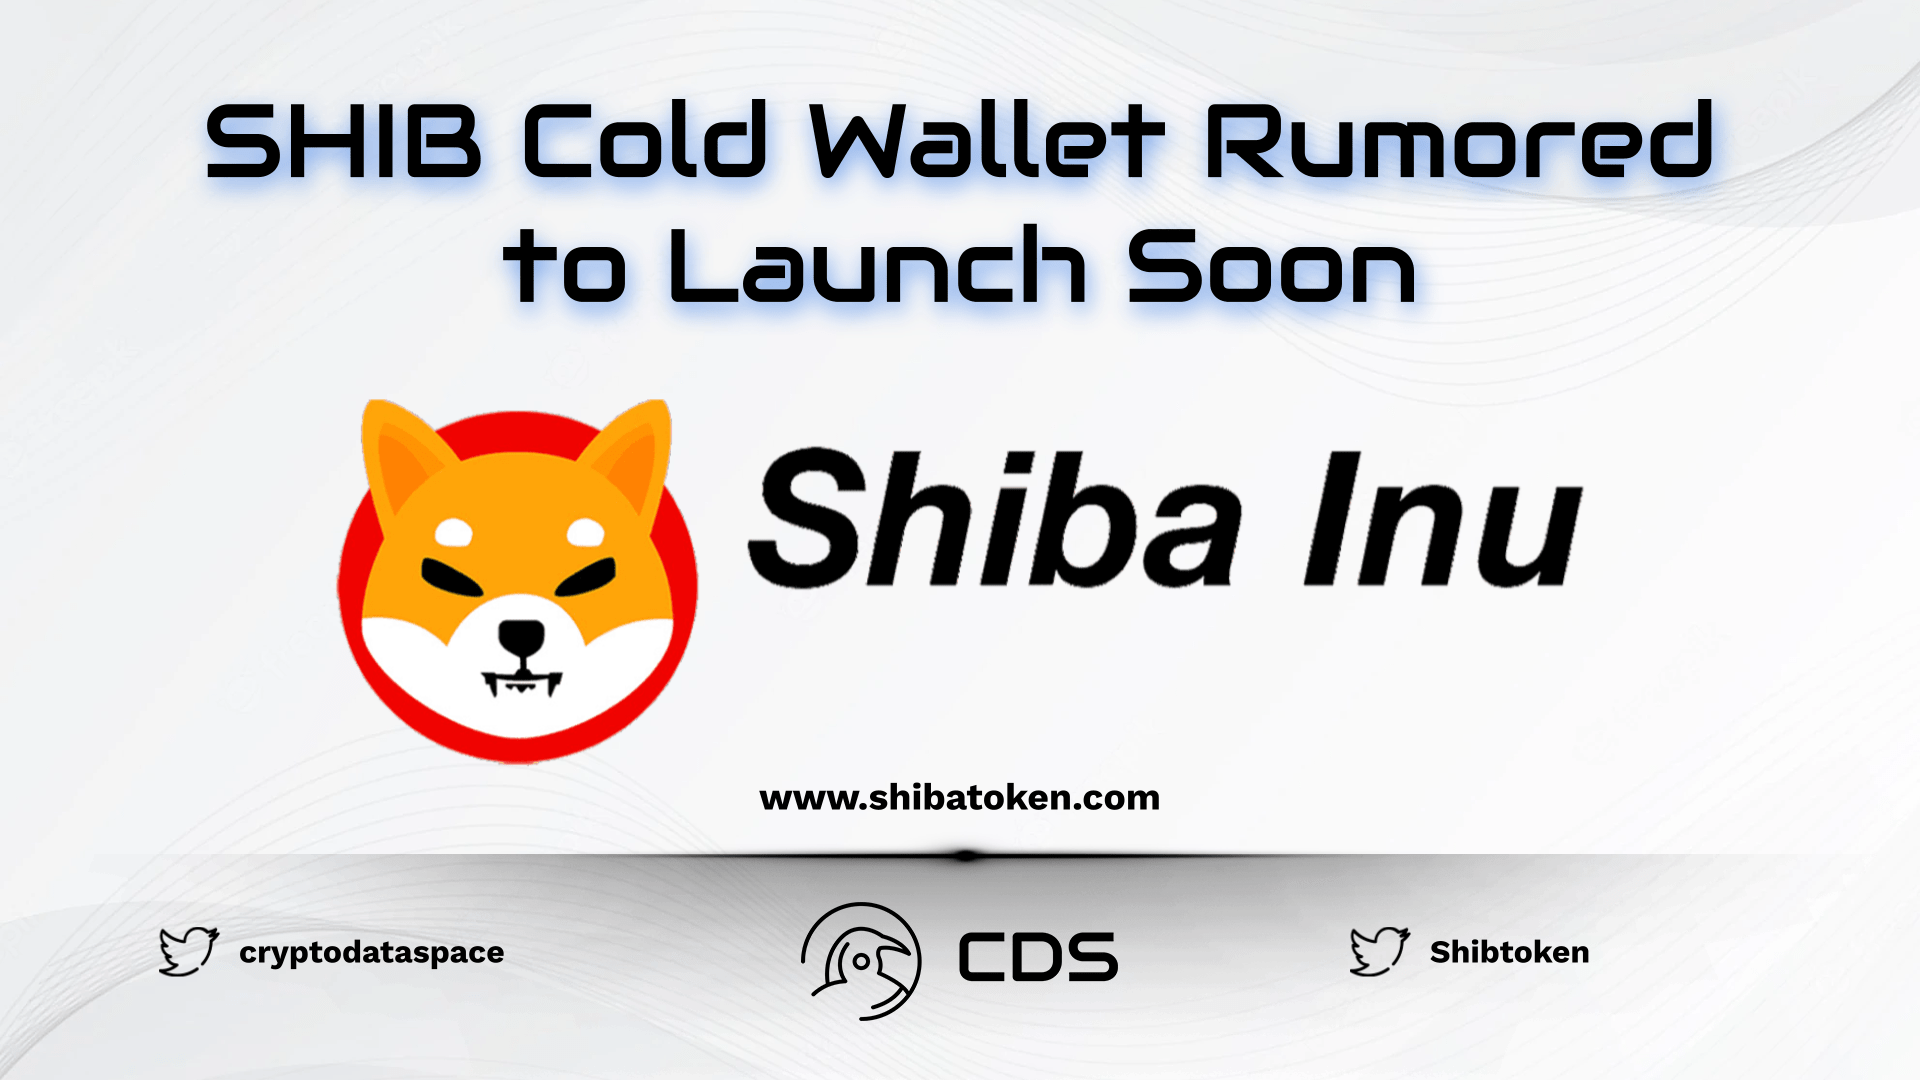 SHIB Cold Wallet Rumored to Launch Soon